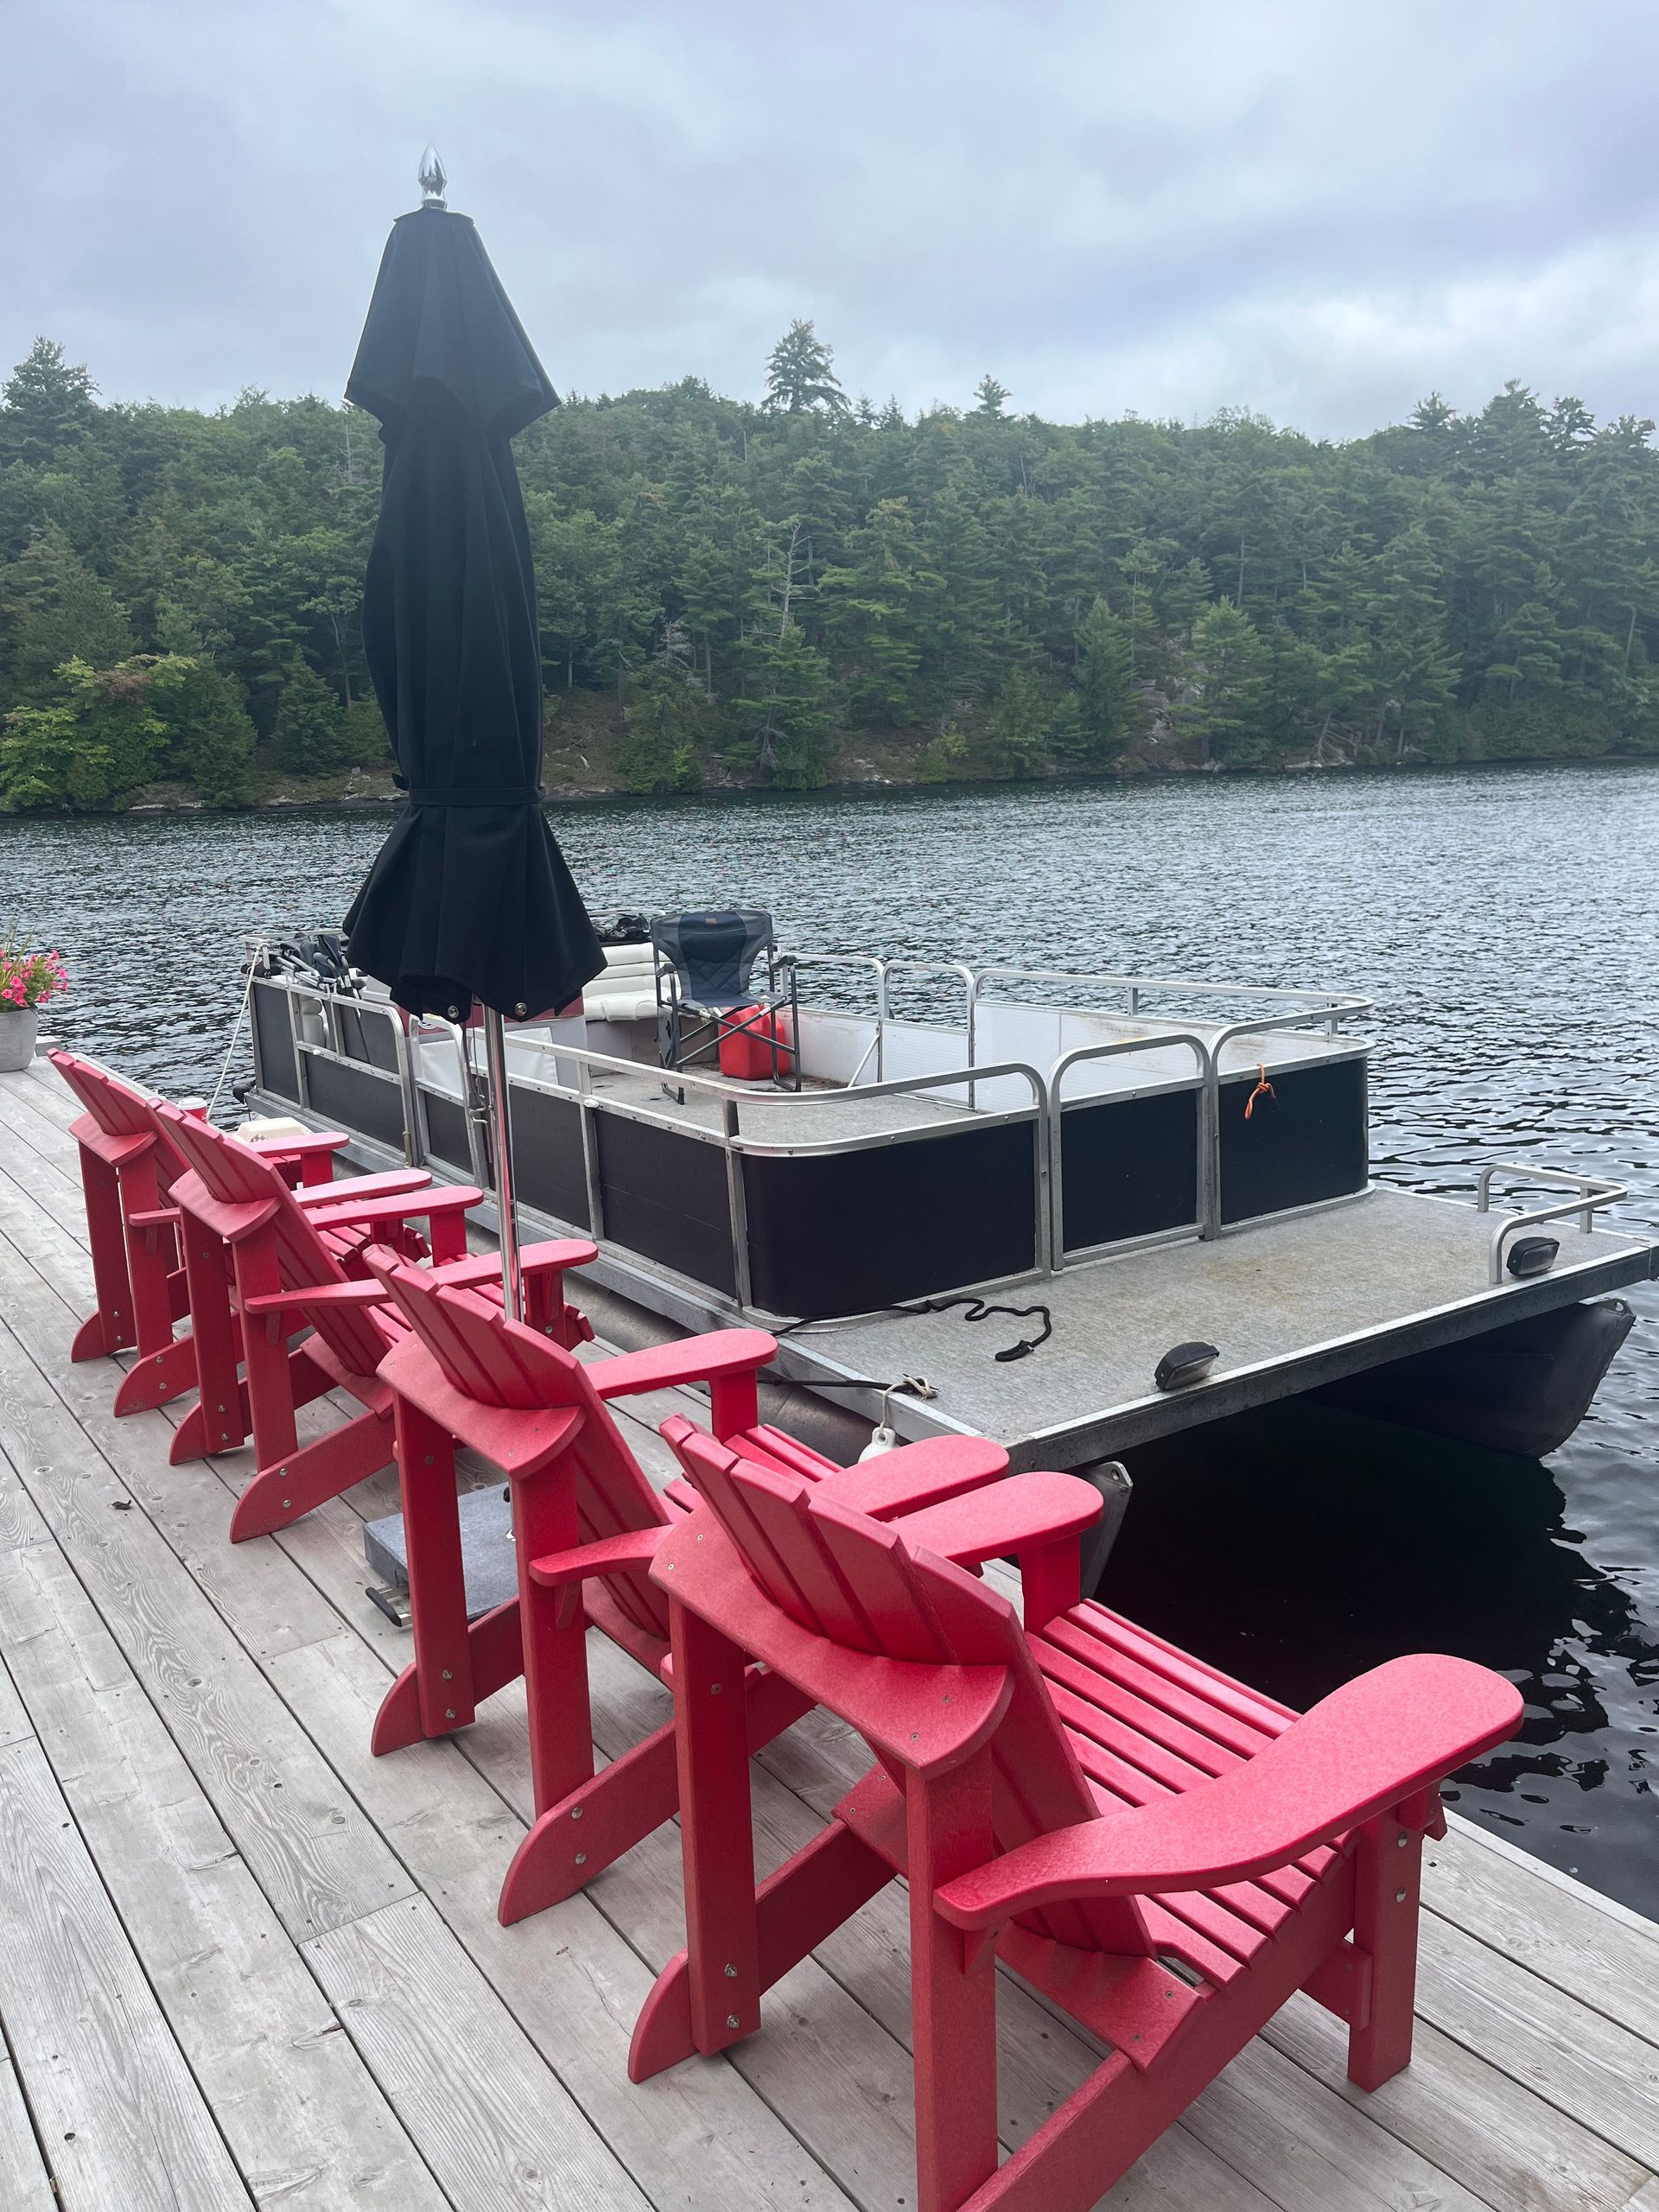 A row of red chairs are sitting on a dock next to a boat.